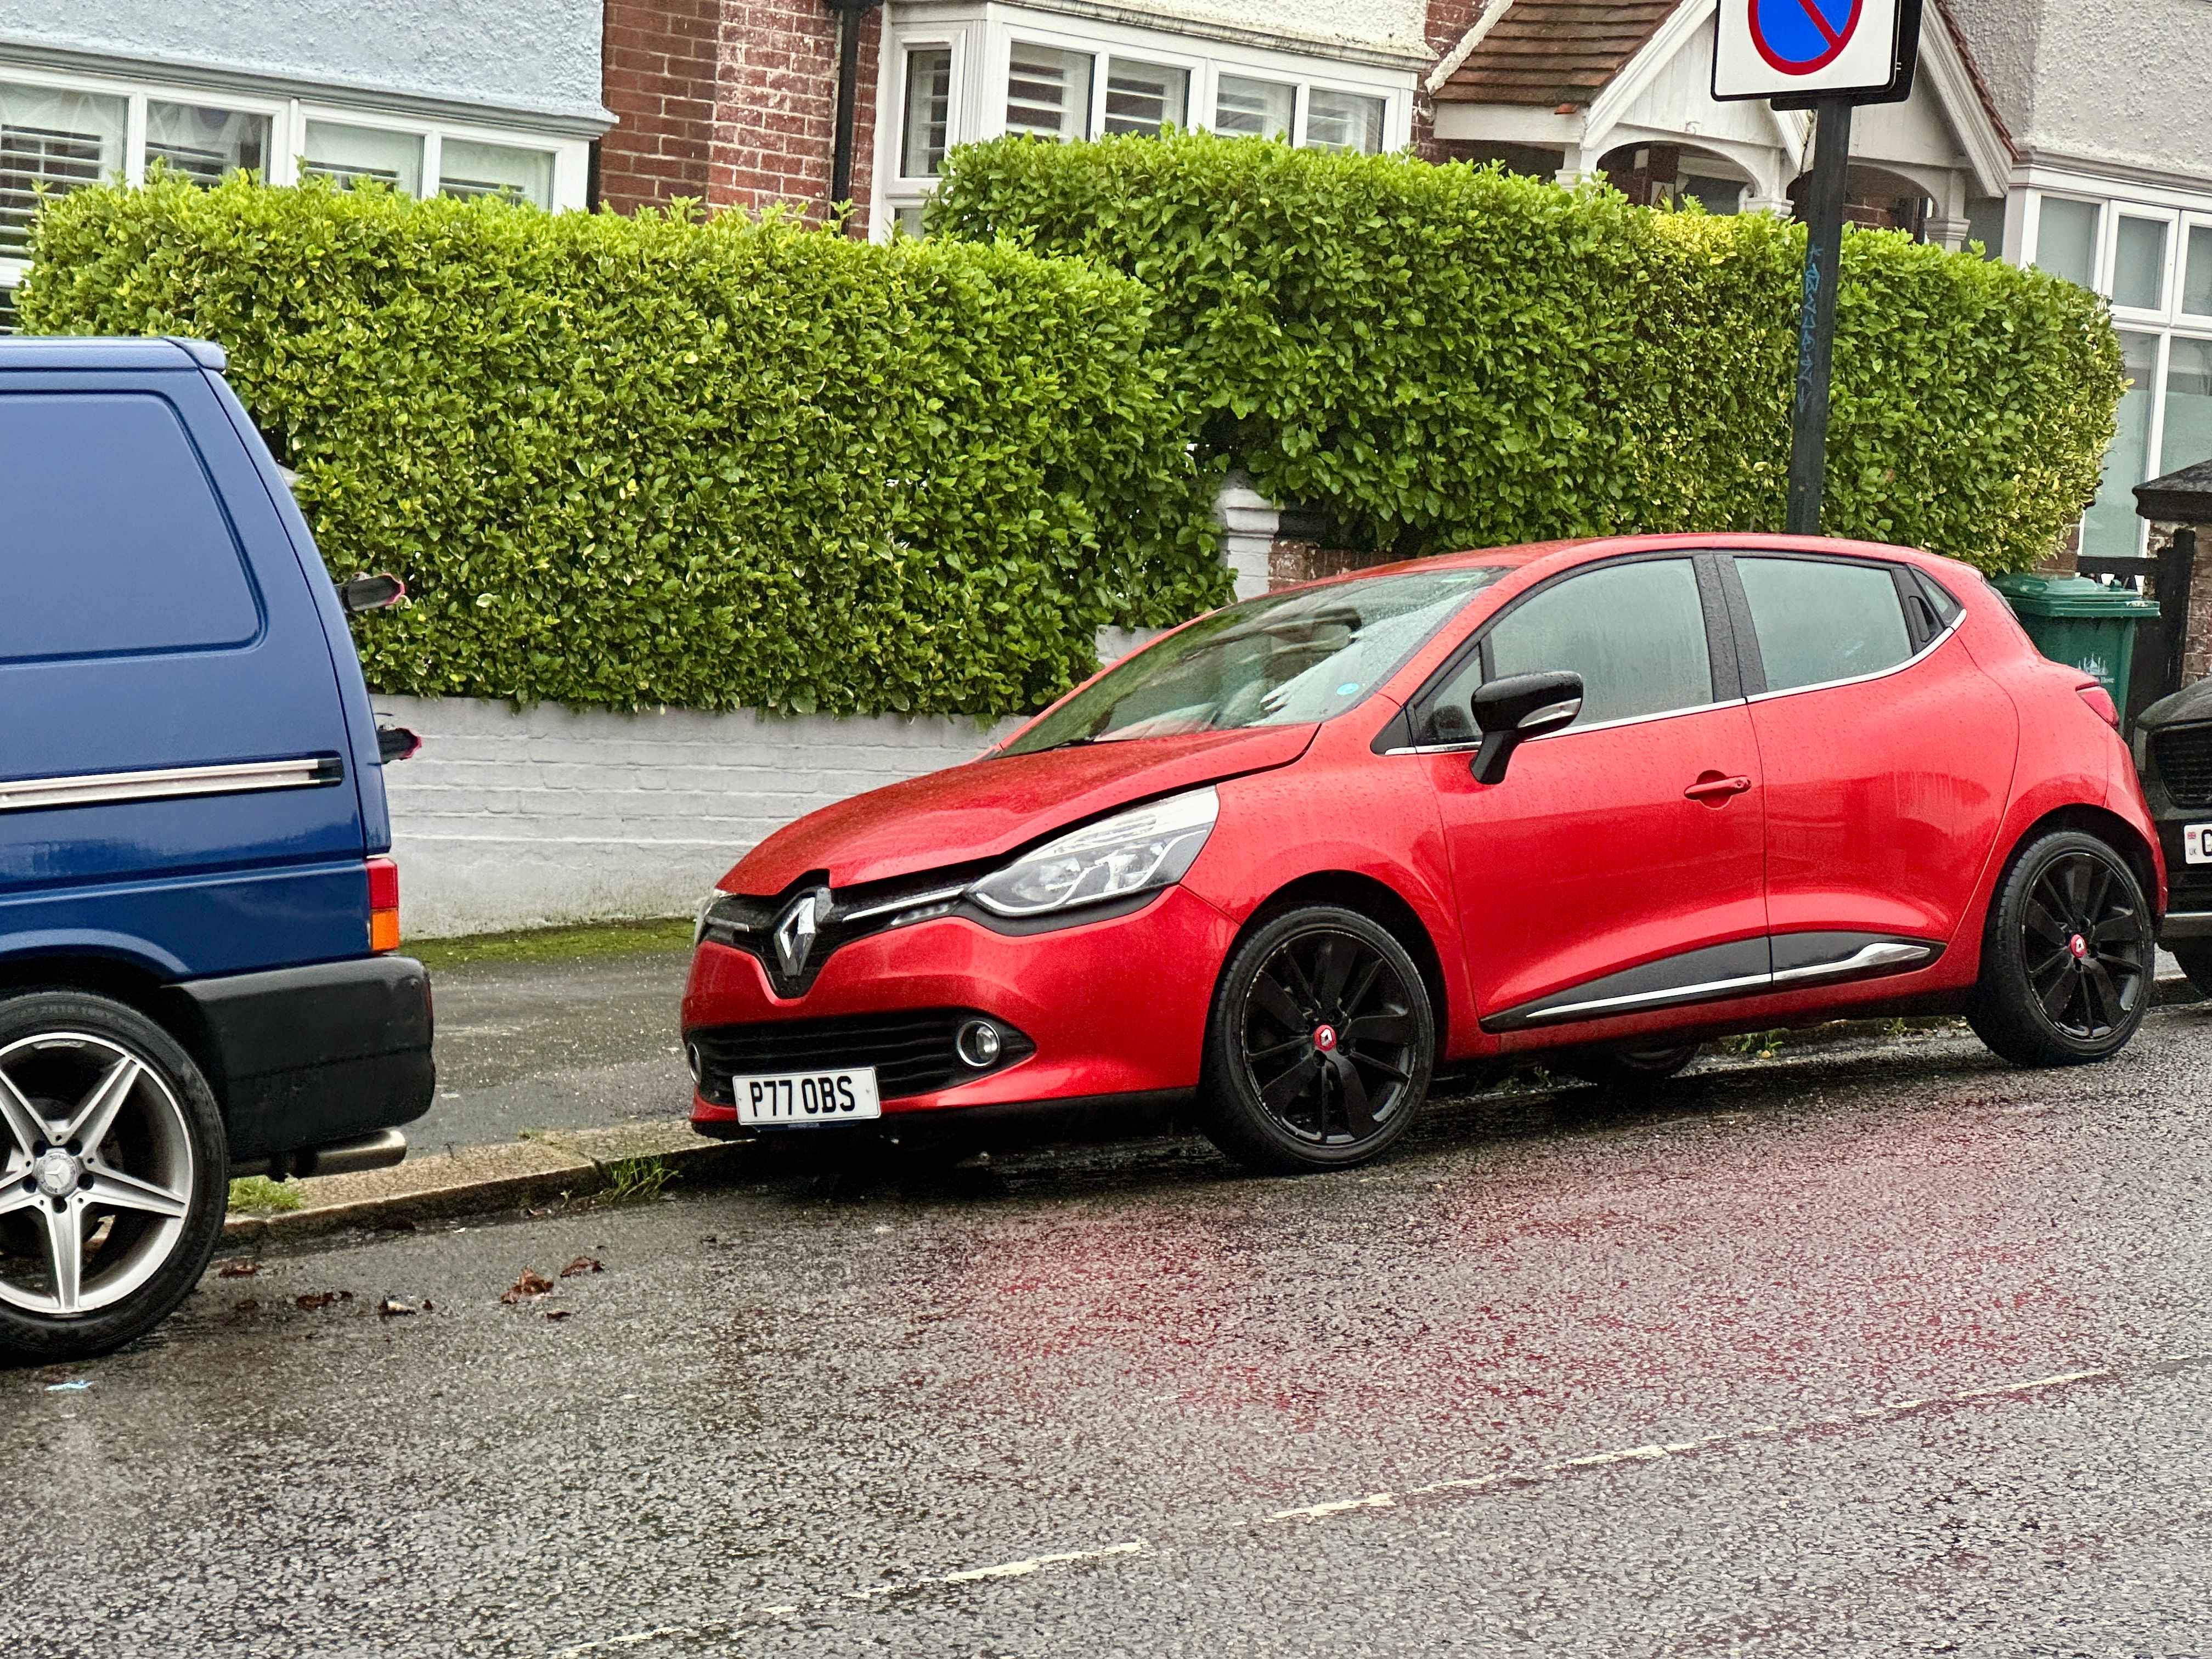 Photograph of P77 OBS - a Red Renault Clio parked in Hollingdean by a non-resident. The third of four photographs supplied by the residents of Hollingdean.